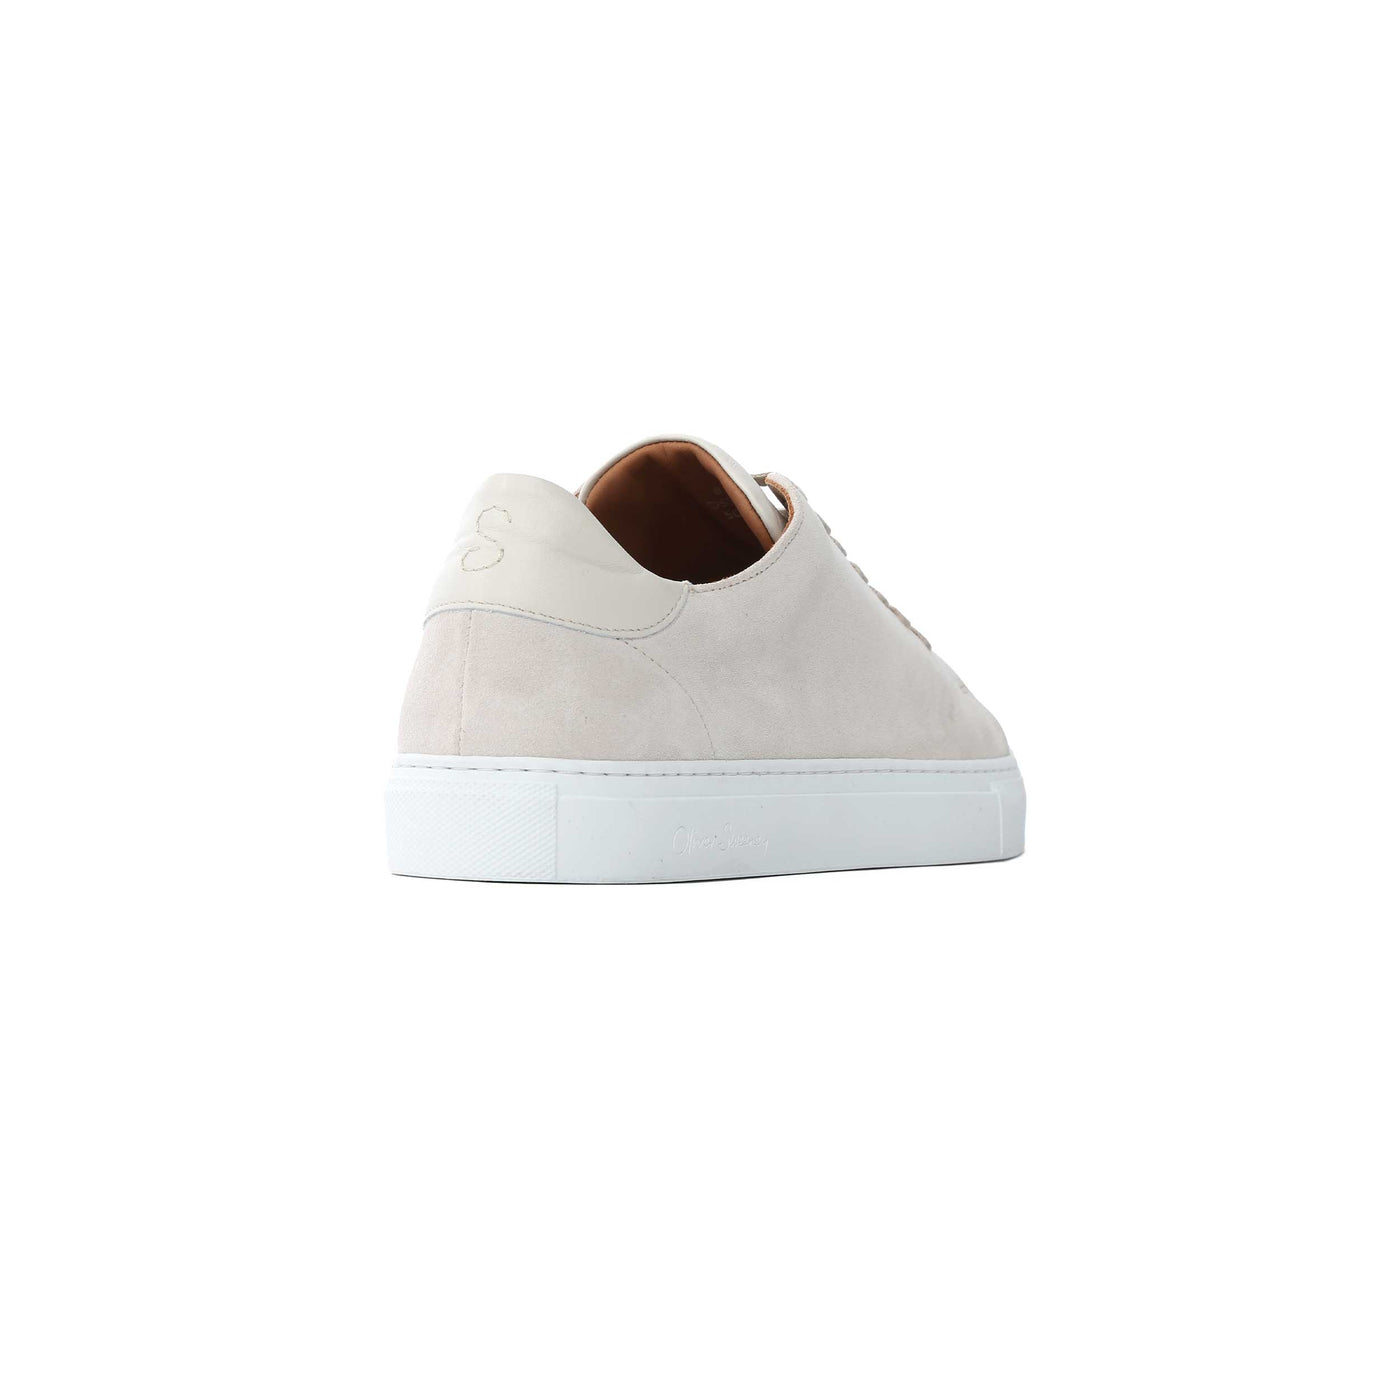 Oliver Sweeney Ossos Trainer in Off White